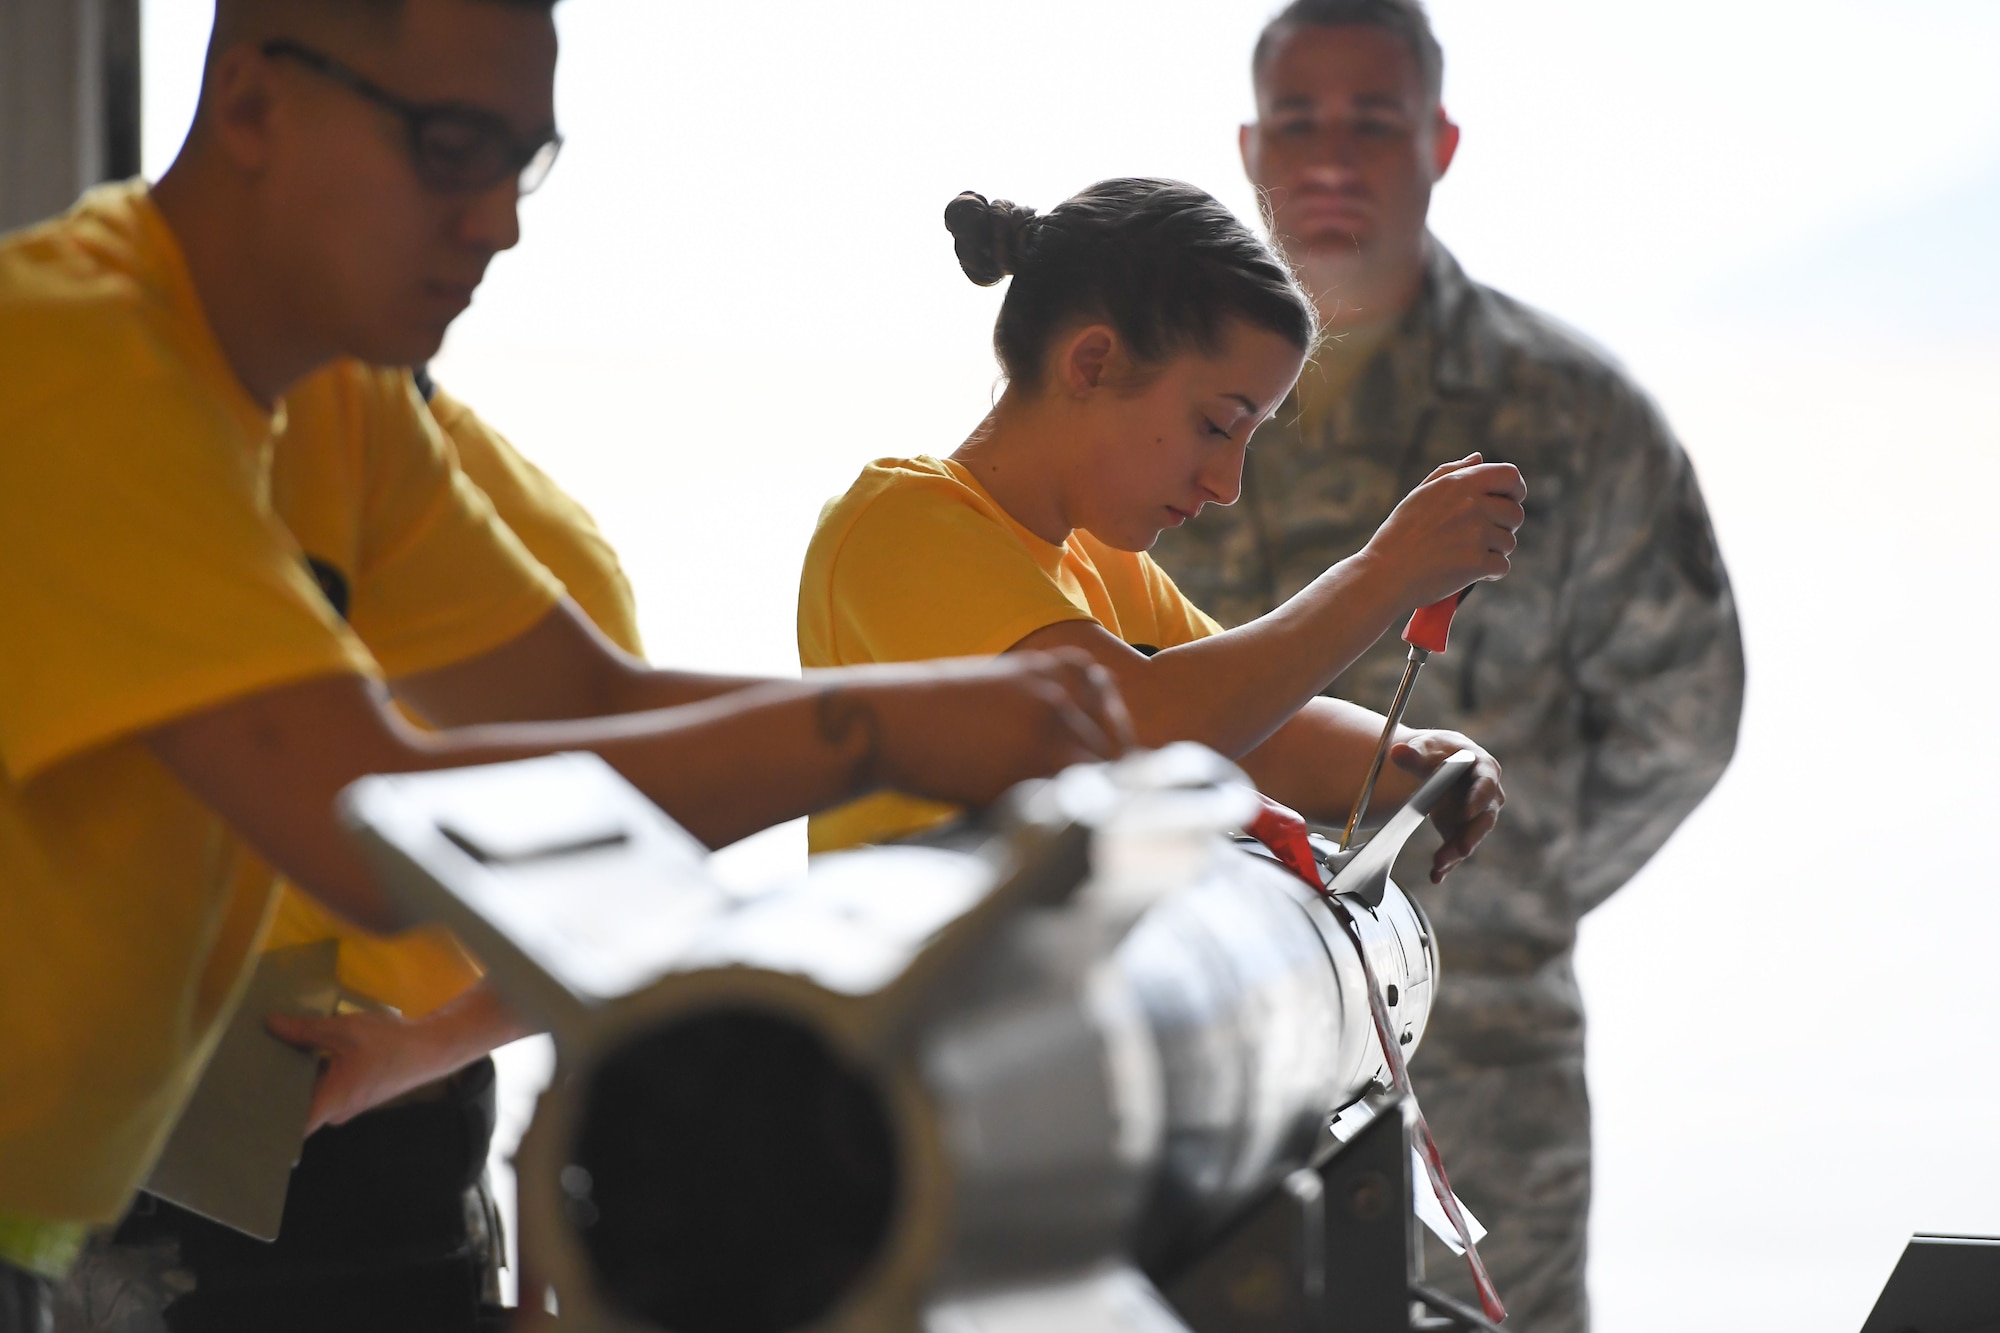 Staff Sgt. Kayla Bruns from the 4th Aircraft Maintenance Unit in the 388th Fighter Wing preps a GBU-12 laser guided bomb during the F-35A weapons loading competition Jan. 19, 2018, at Hill Air Force Base, Utah. These competitions benefit Airmen by honing their specialty skills and bolsters comradery and friendly rivalries. (U.S. Air Force photo by Cynthia Griggs)